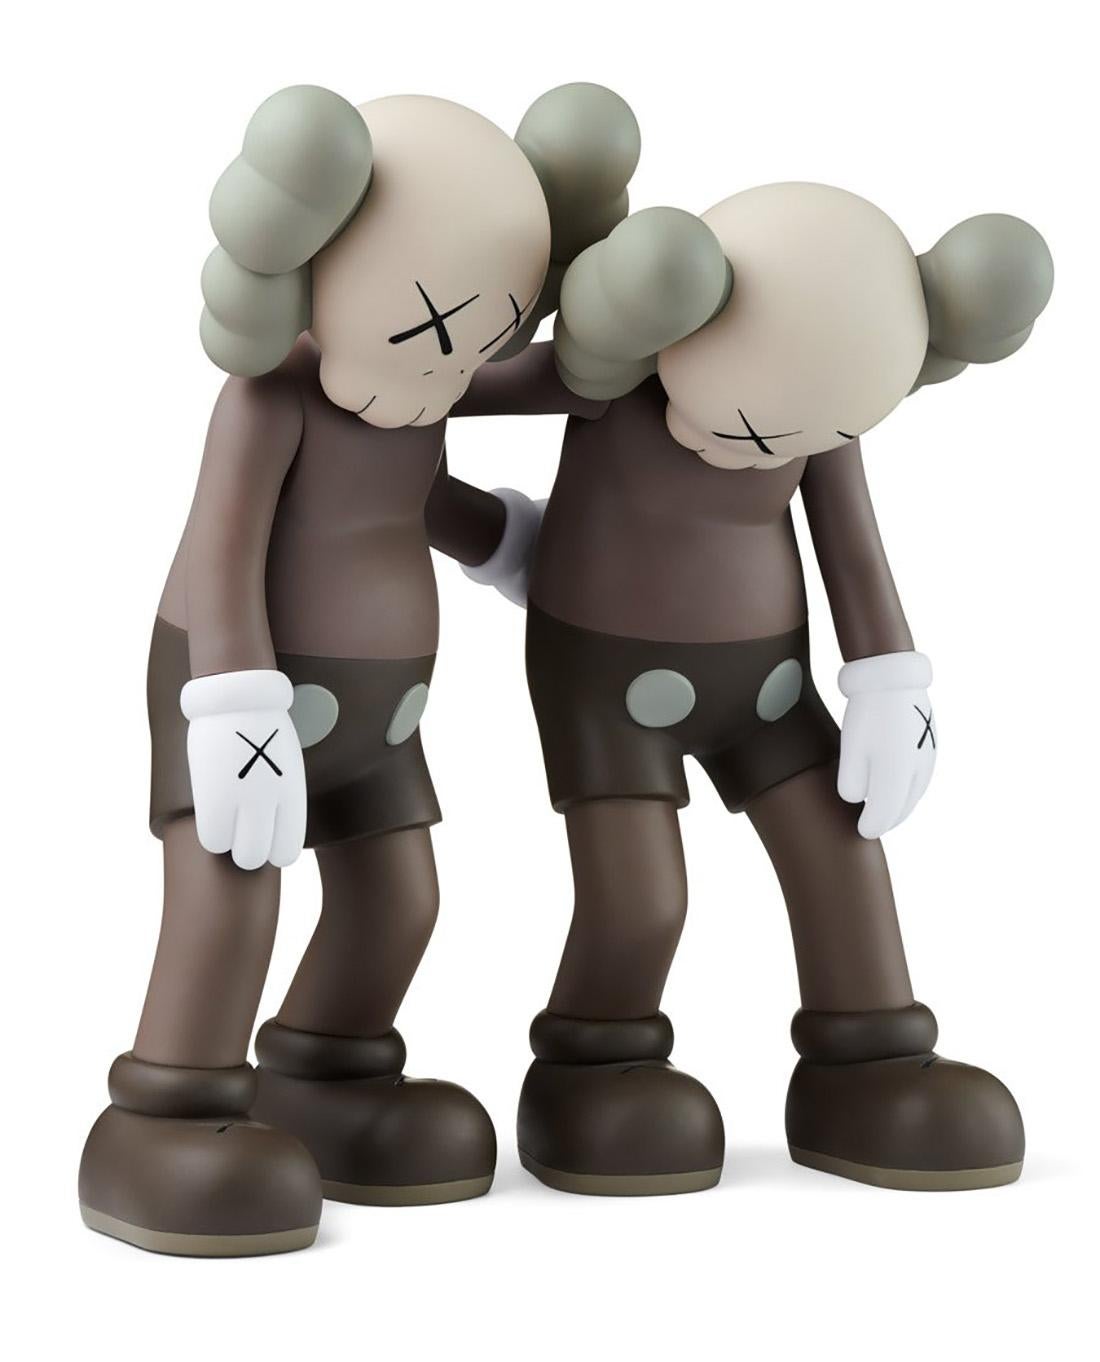 KAWS Companion 2016-2022:
A sharply curated set of 10 distinguished individual Brown KAWS Companions new & unopened in original packaging. Dimensions as follows:

KAWS Clean Slate, 2018: 14.25 x 8 x 8 inches. 
KAWS Brown Companion 2016: 11 x 5